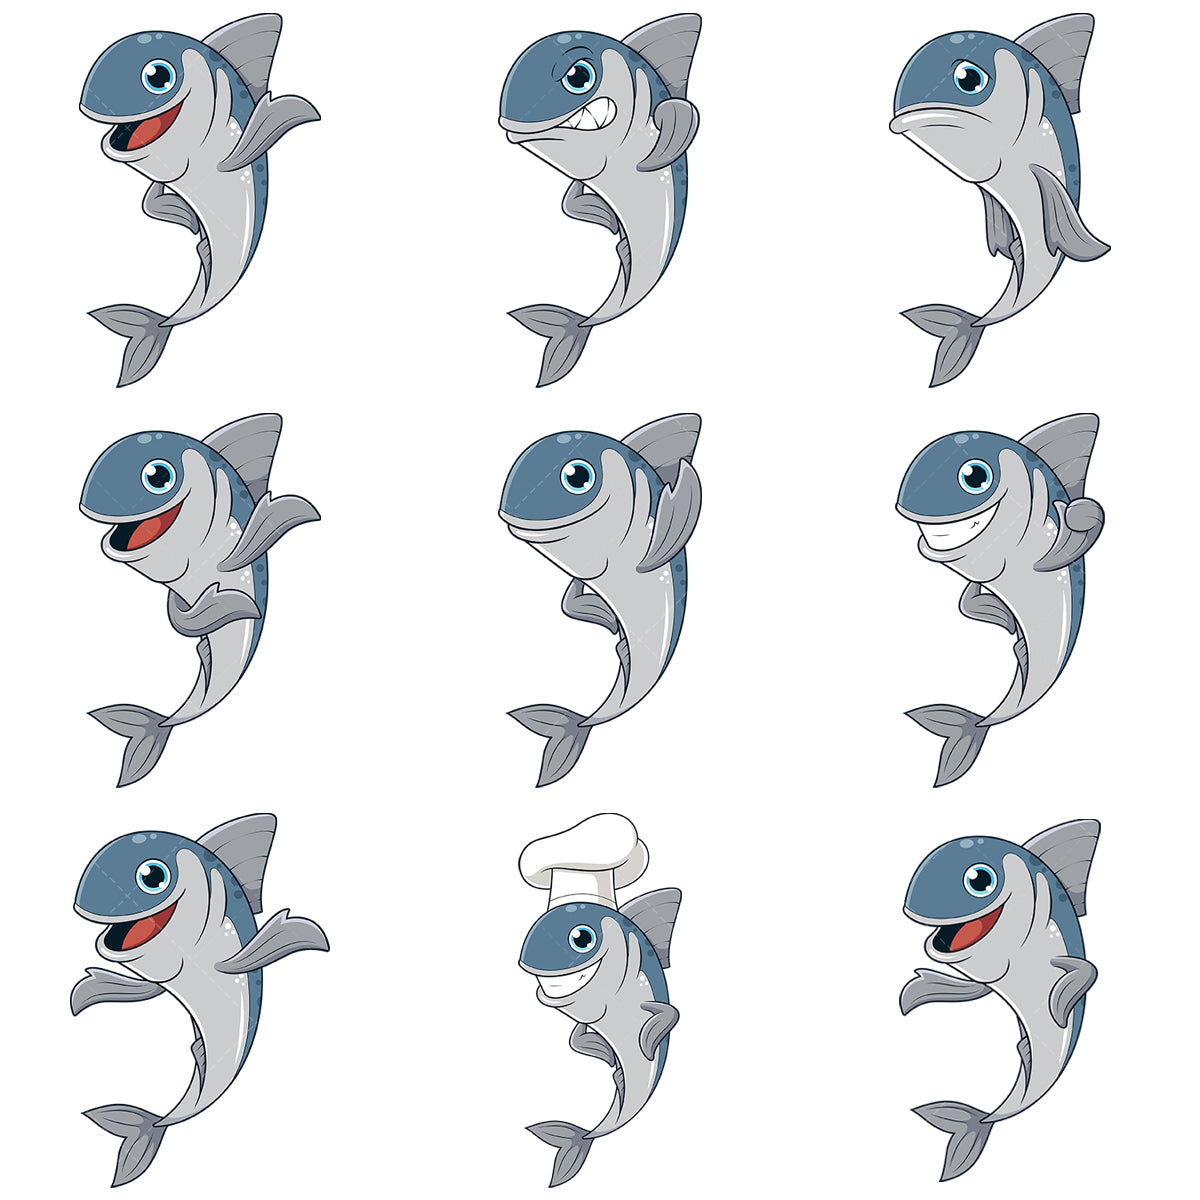 A bundle of 9 royalty-free stock vector illustrations of a sardine fish character.